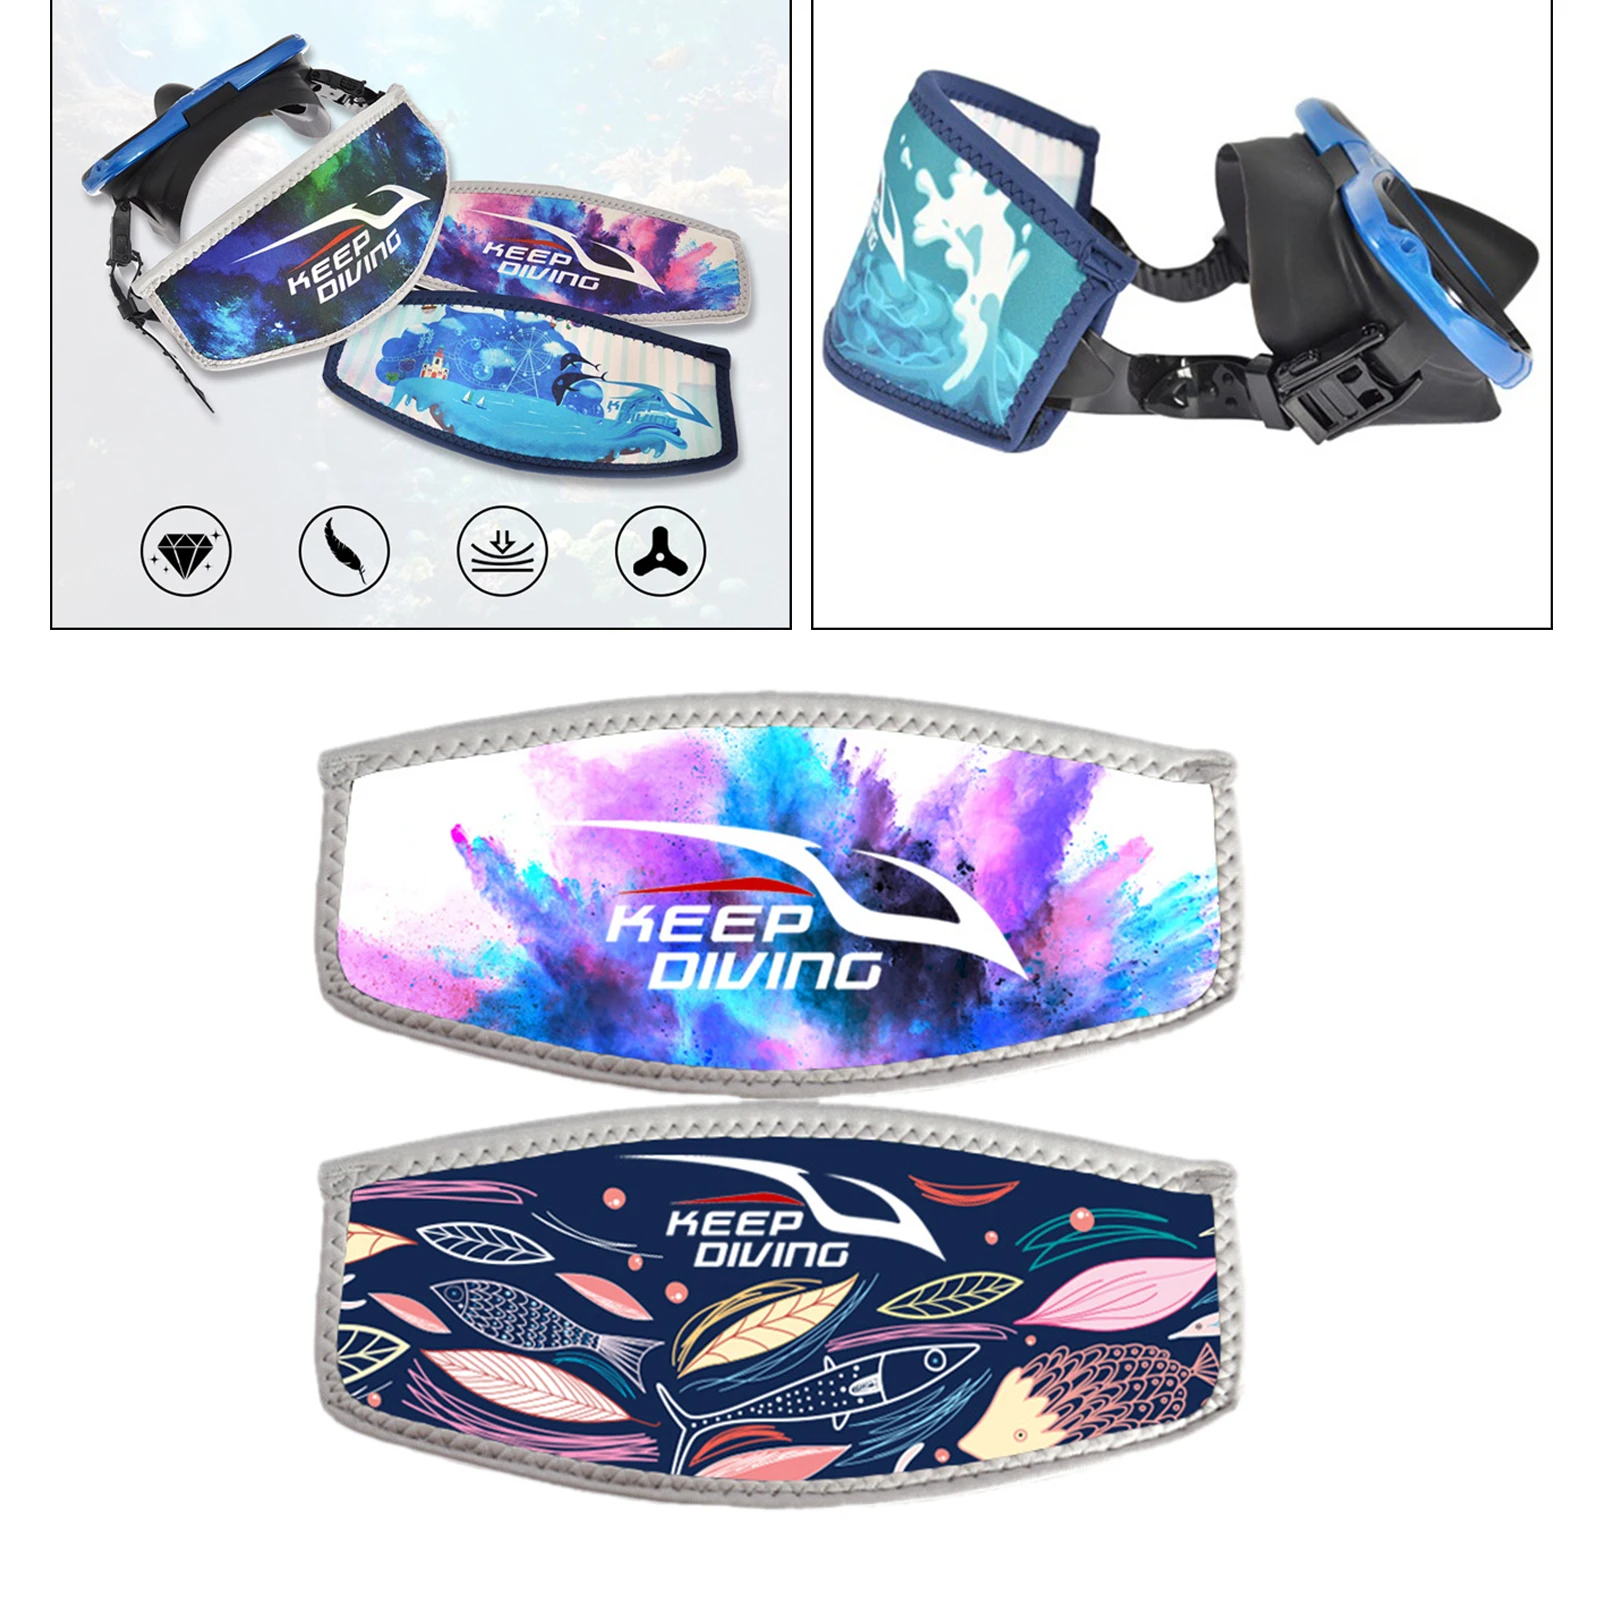 Neoprene Waterproof Scuba Diving Mask Strap Cover Swimming Surfing Snorkeling Protect Hair Strap Cover Wrapper Scuba Gear